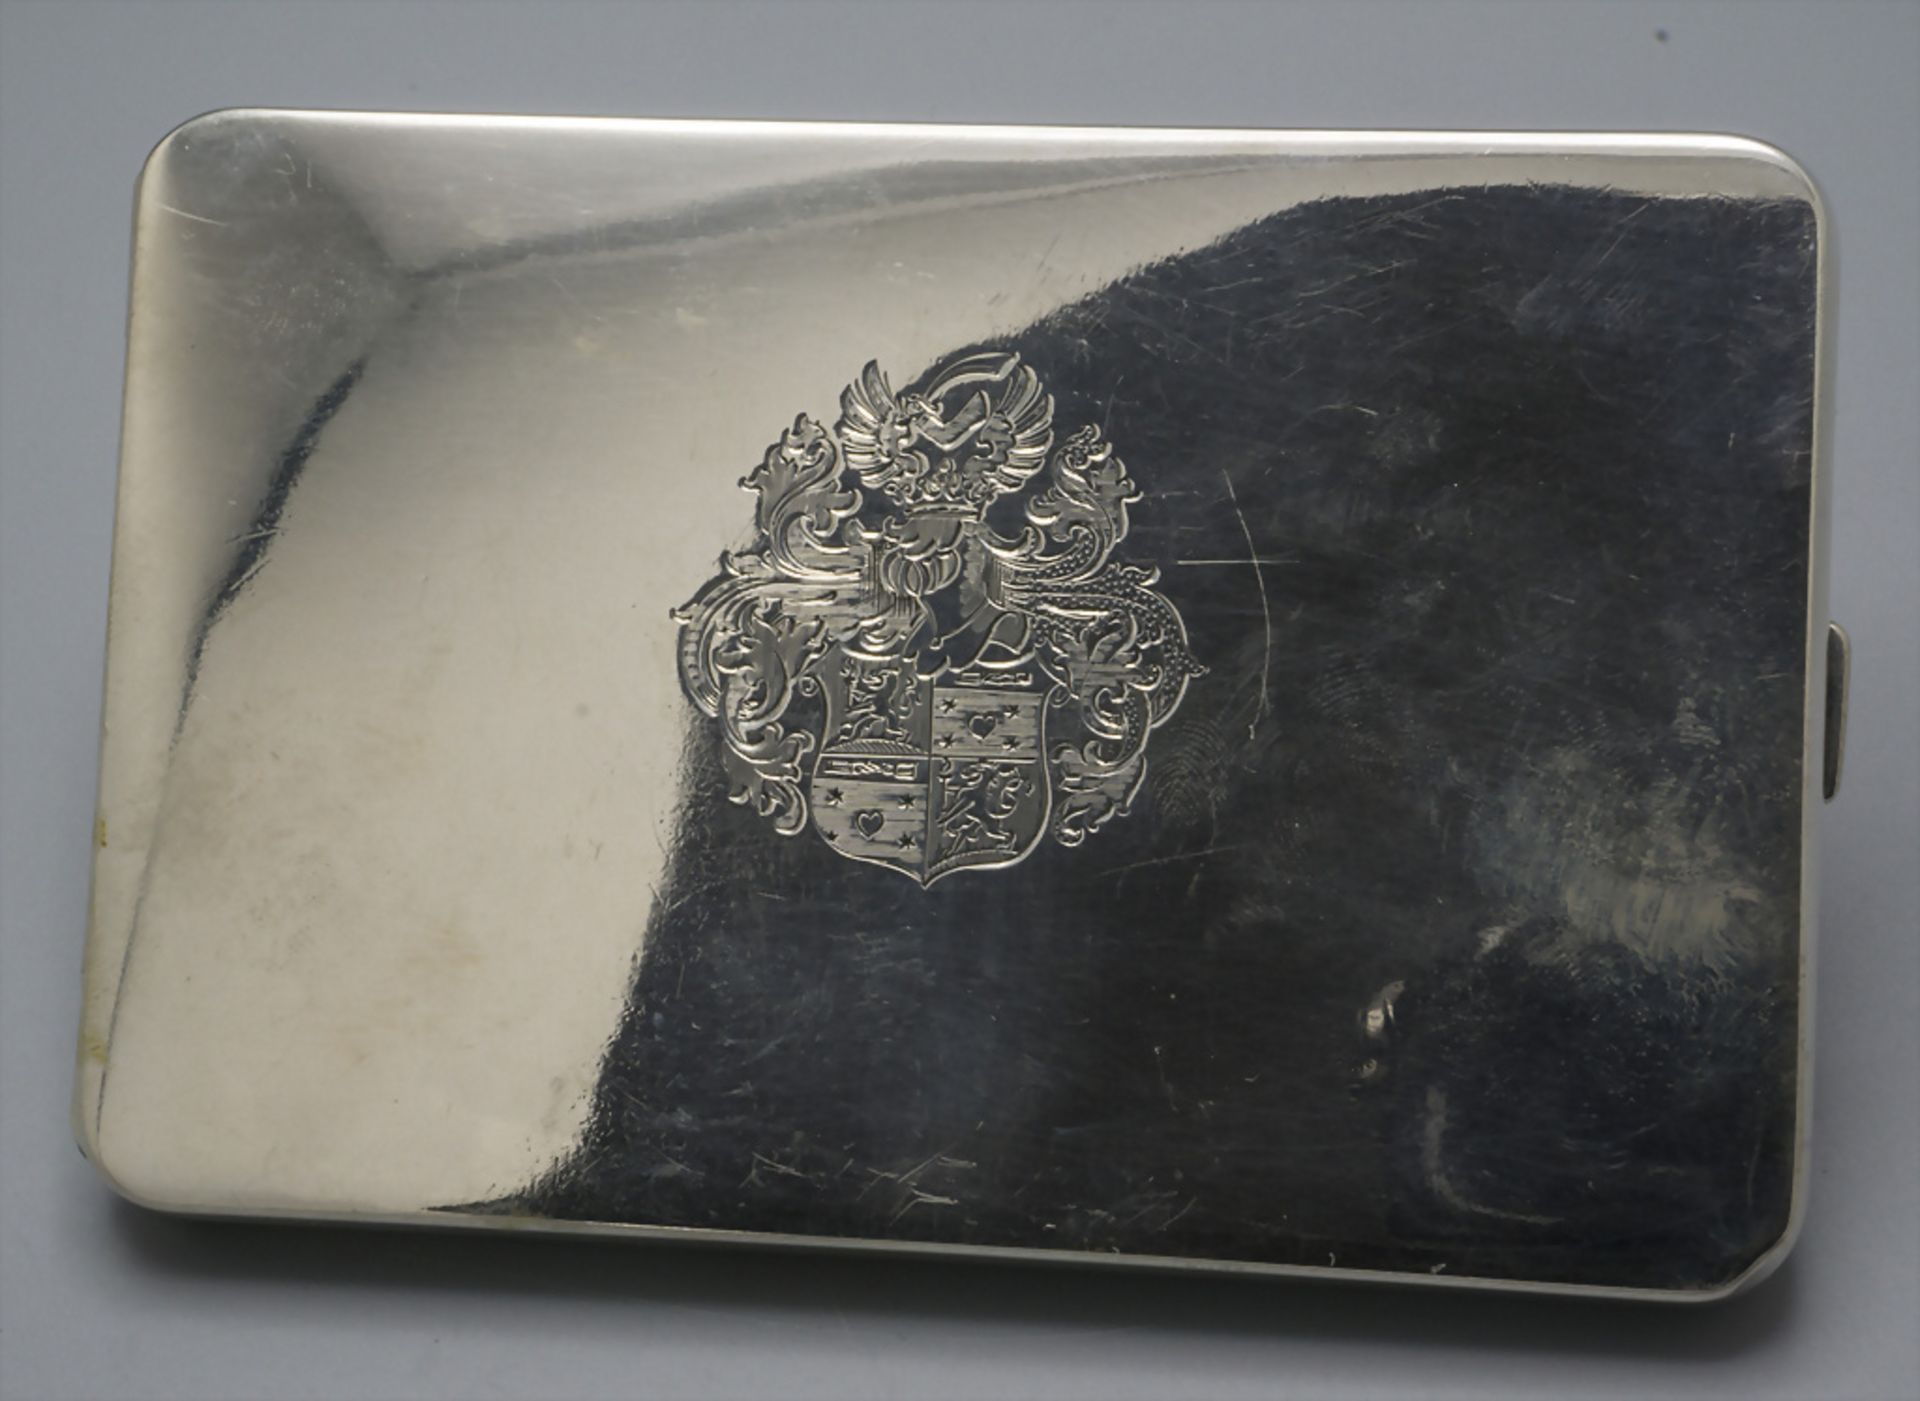 Zigarettenetui mit Adelswappen / A silver cigarette case with coat of arms, Budapest, 1920-1930